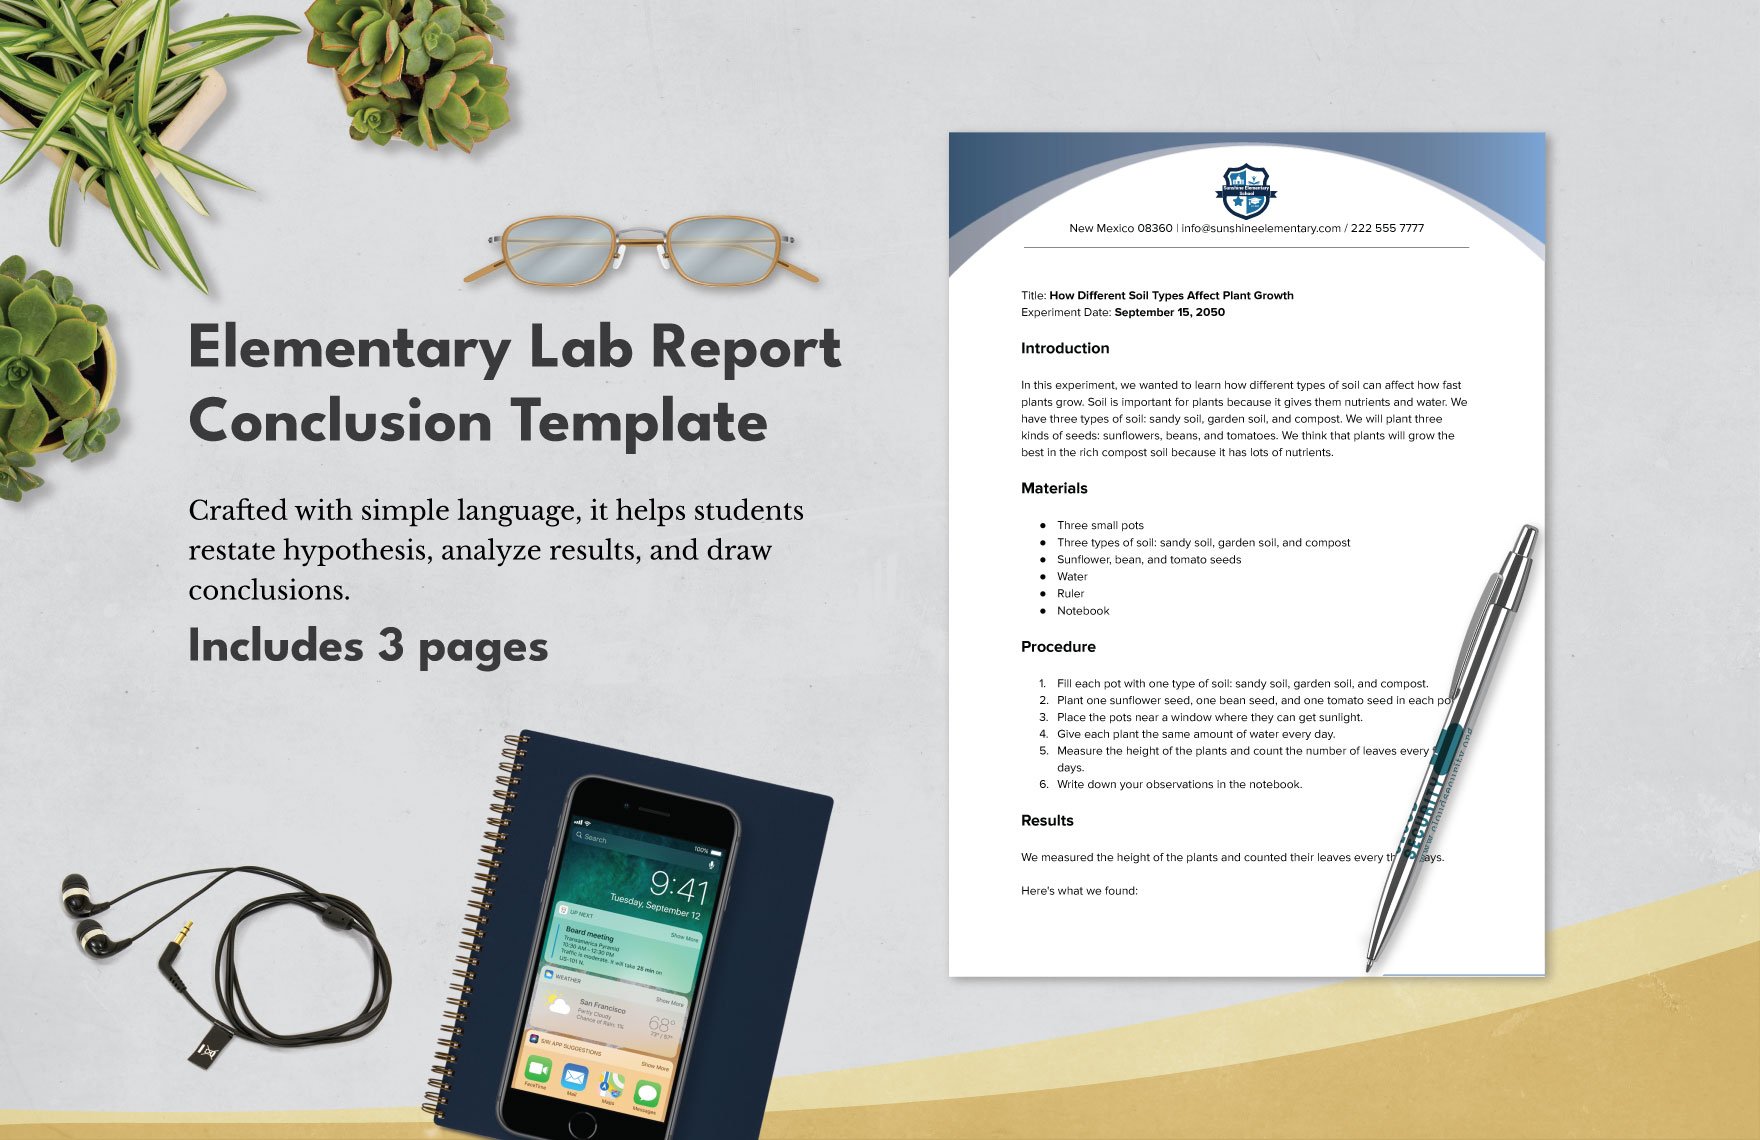 Elementary Lab Report Conclusion Template